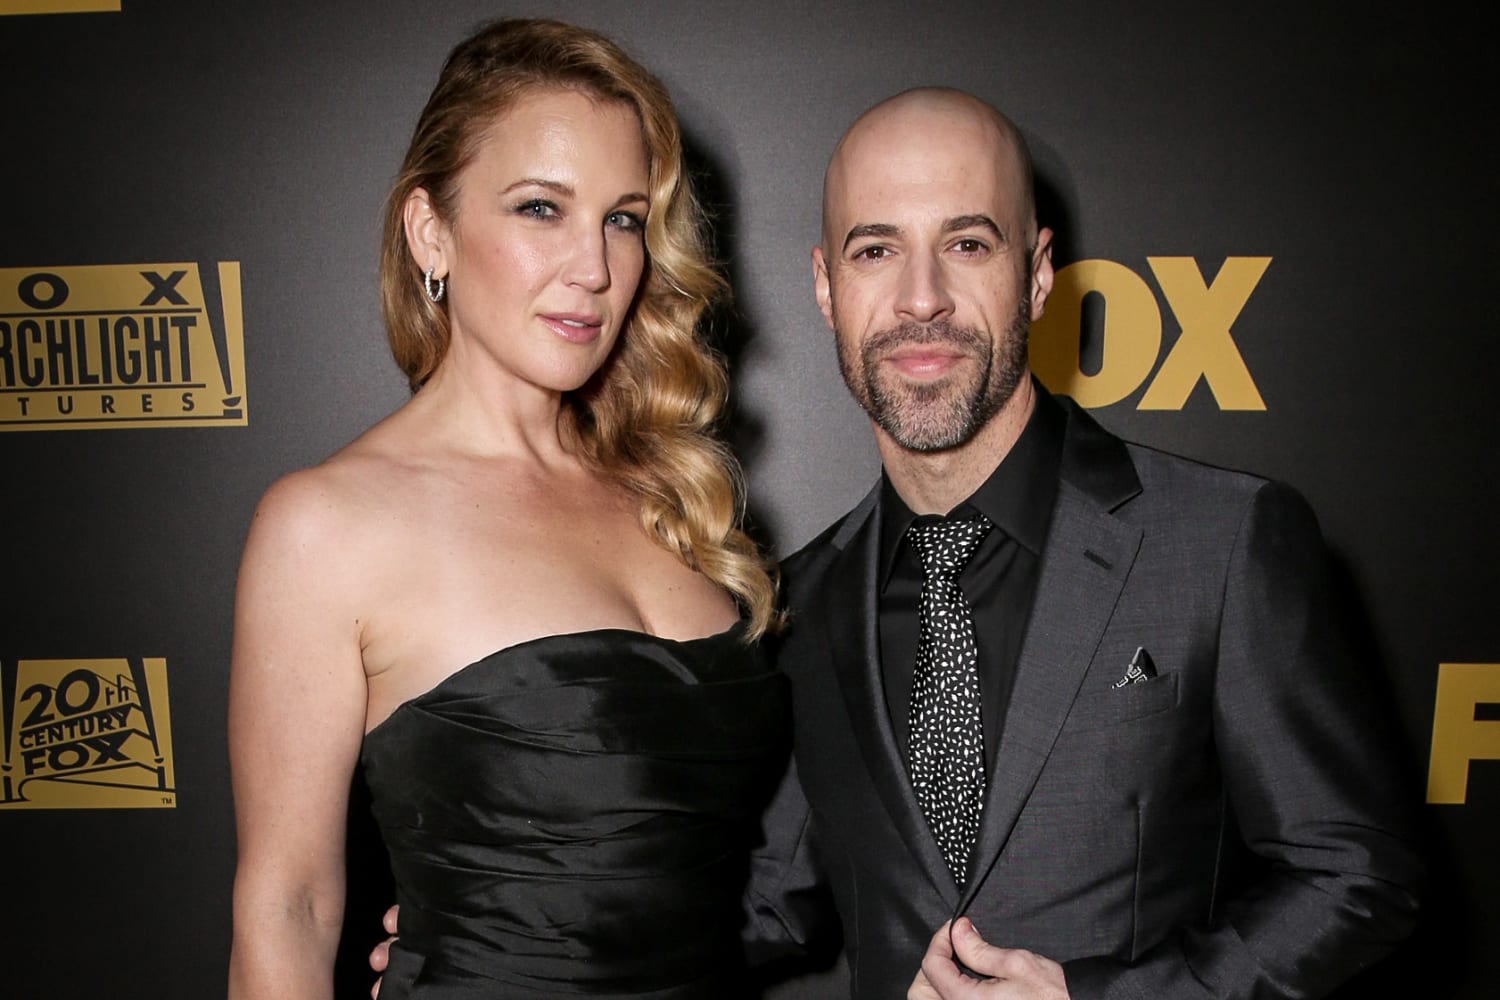 Chris Daughtry's wife slams 'homicide' rumors following daughter's death